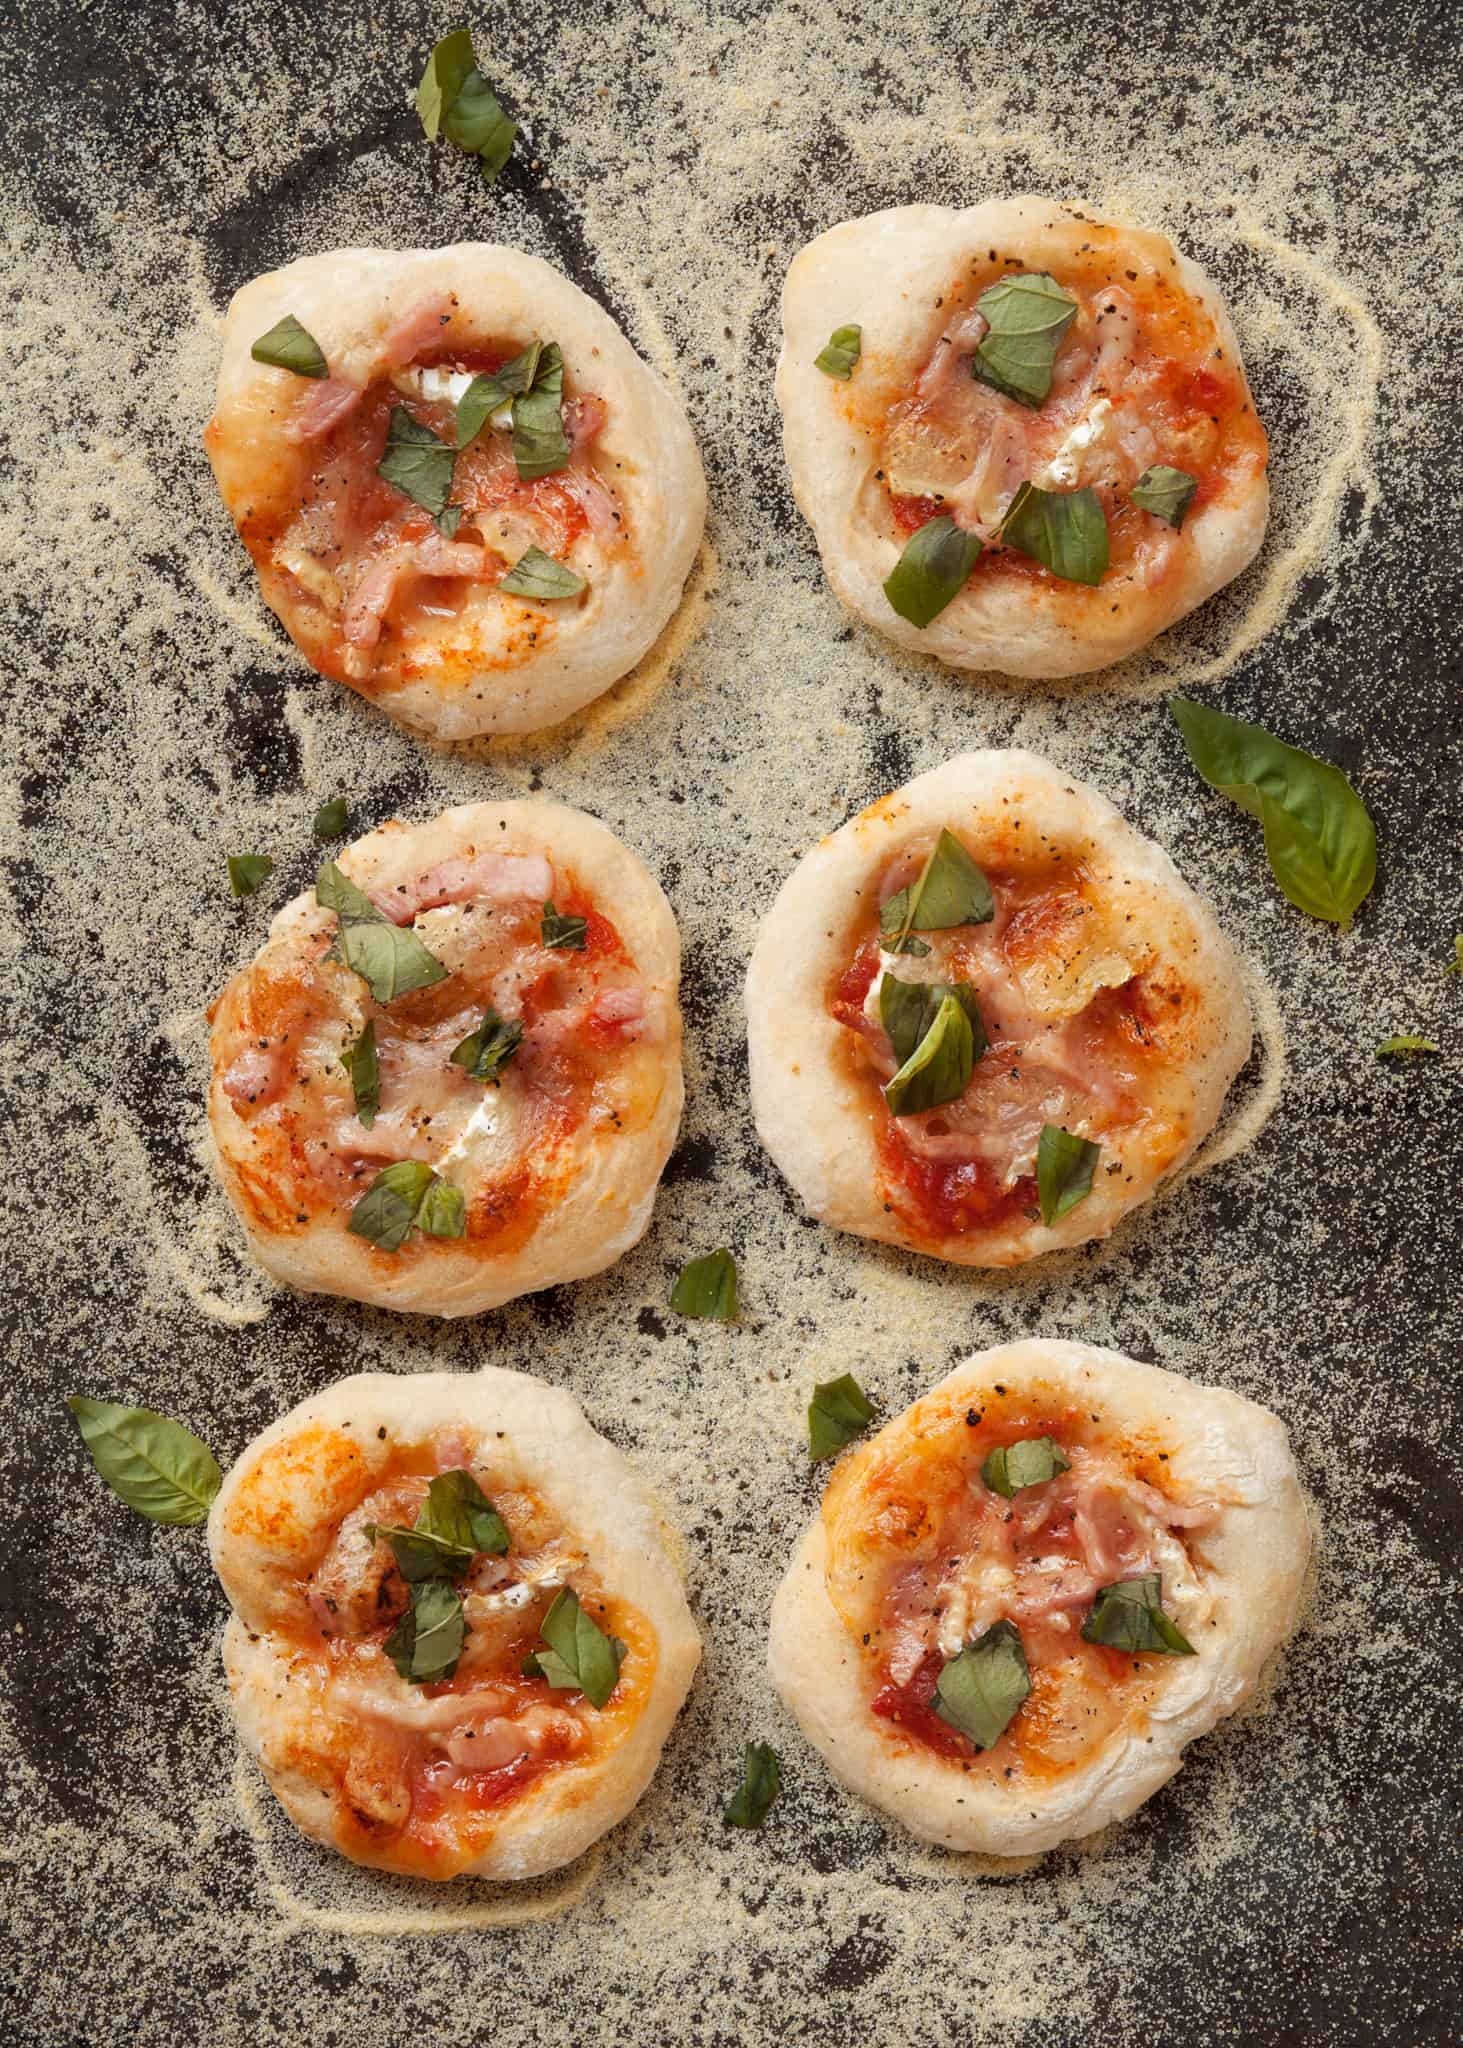 Bacon Brie Basil Mini Pizzas for Game Day! #gameday #appetizer #pizza #fingerfood